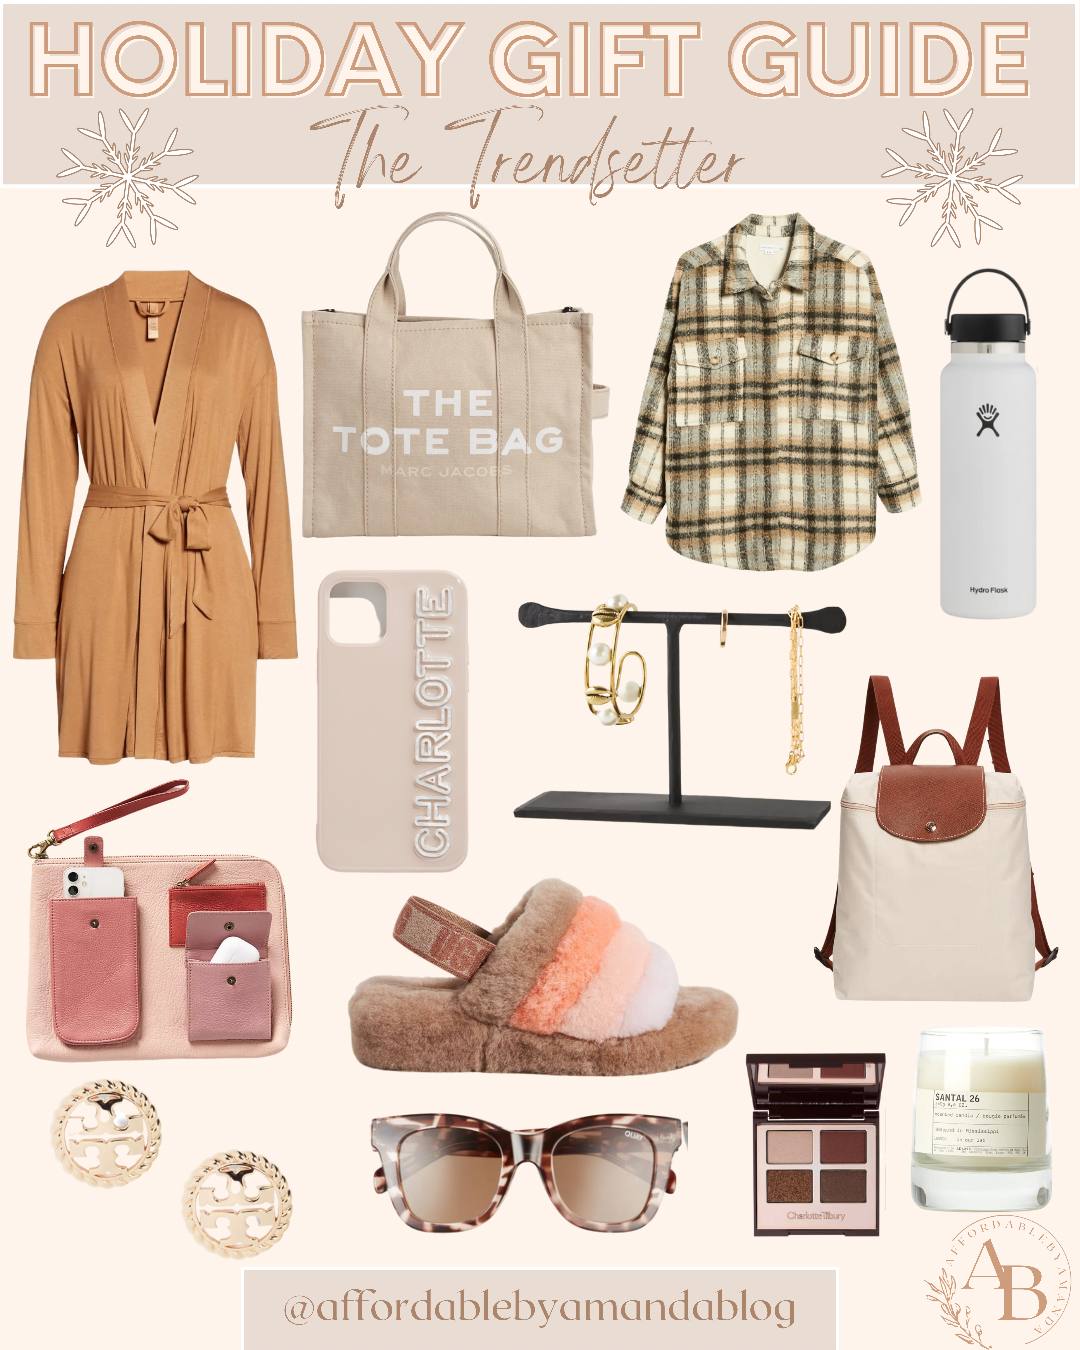 Holiday Gift Guide: For the Trendsetter - Affordable by Amanda